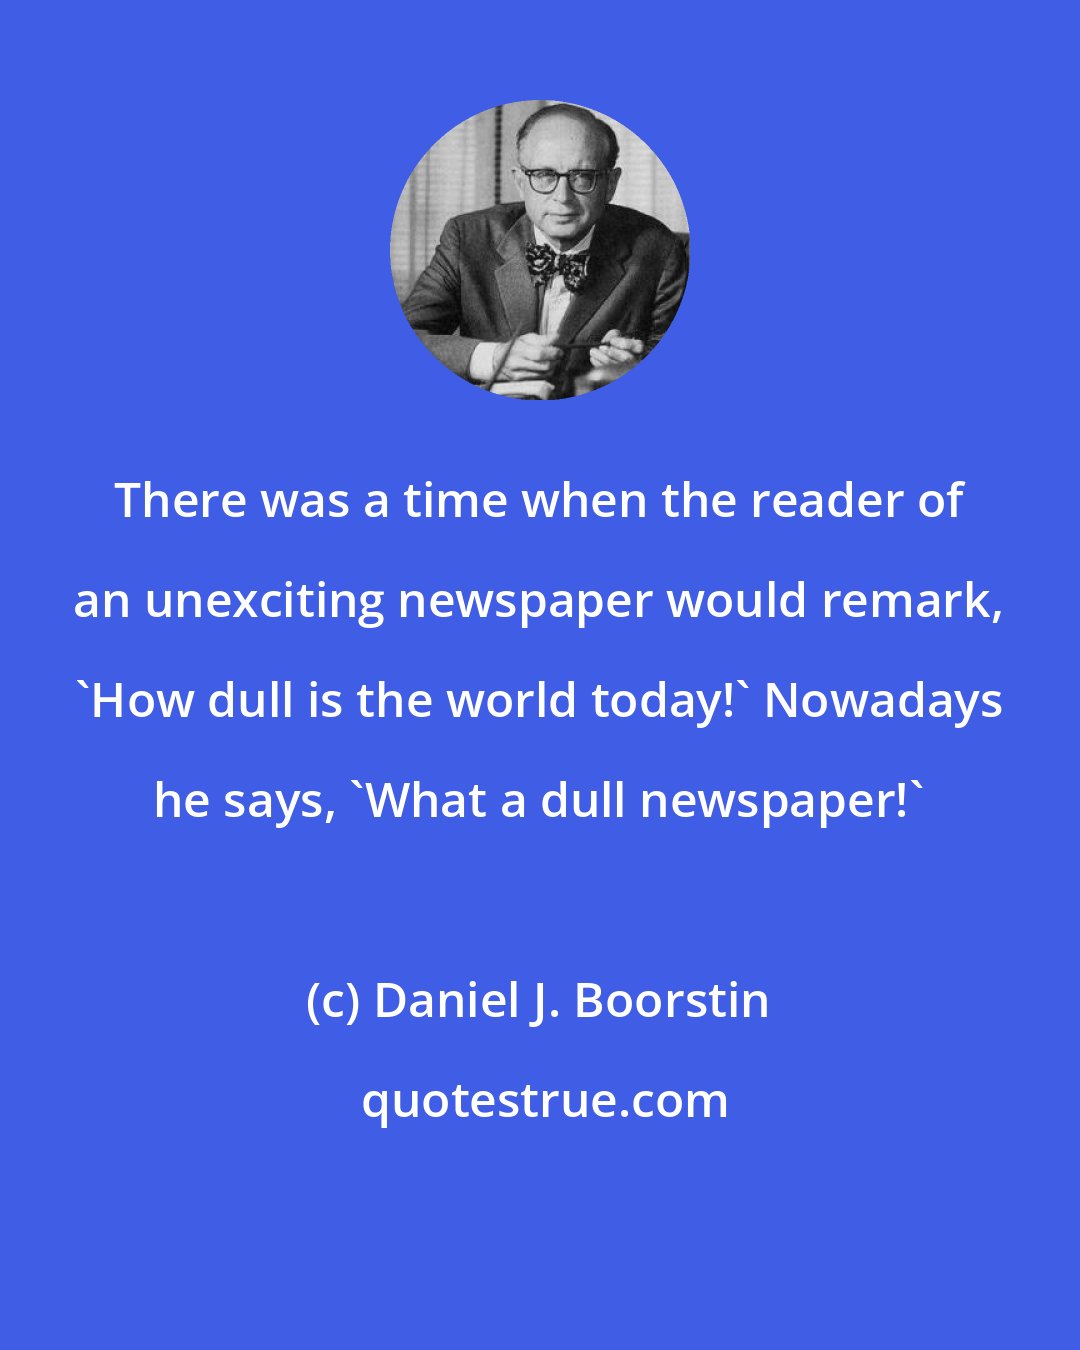 Daniel J. Boorstin: There was a time when the reader of an unexciting newspaper would remark, 'How dull is the world today!' Nowadays he says, 'What a dull newspaper!'